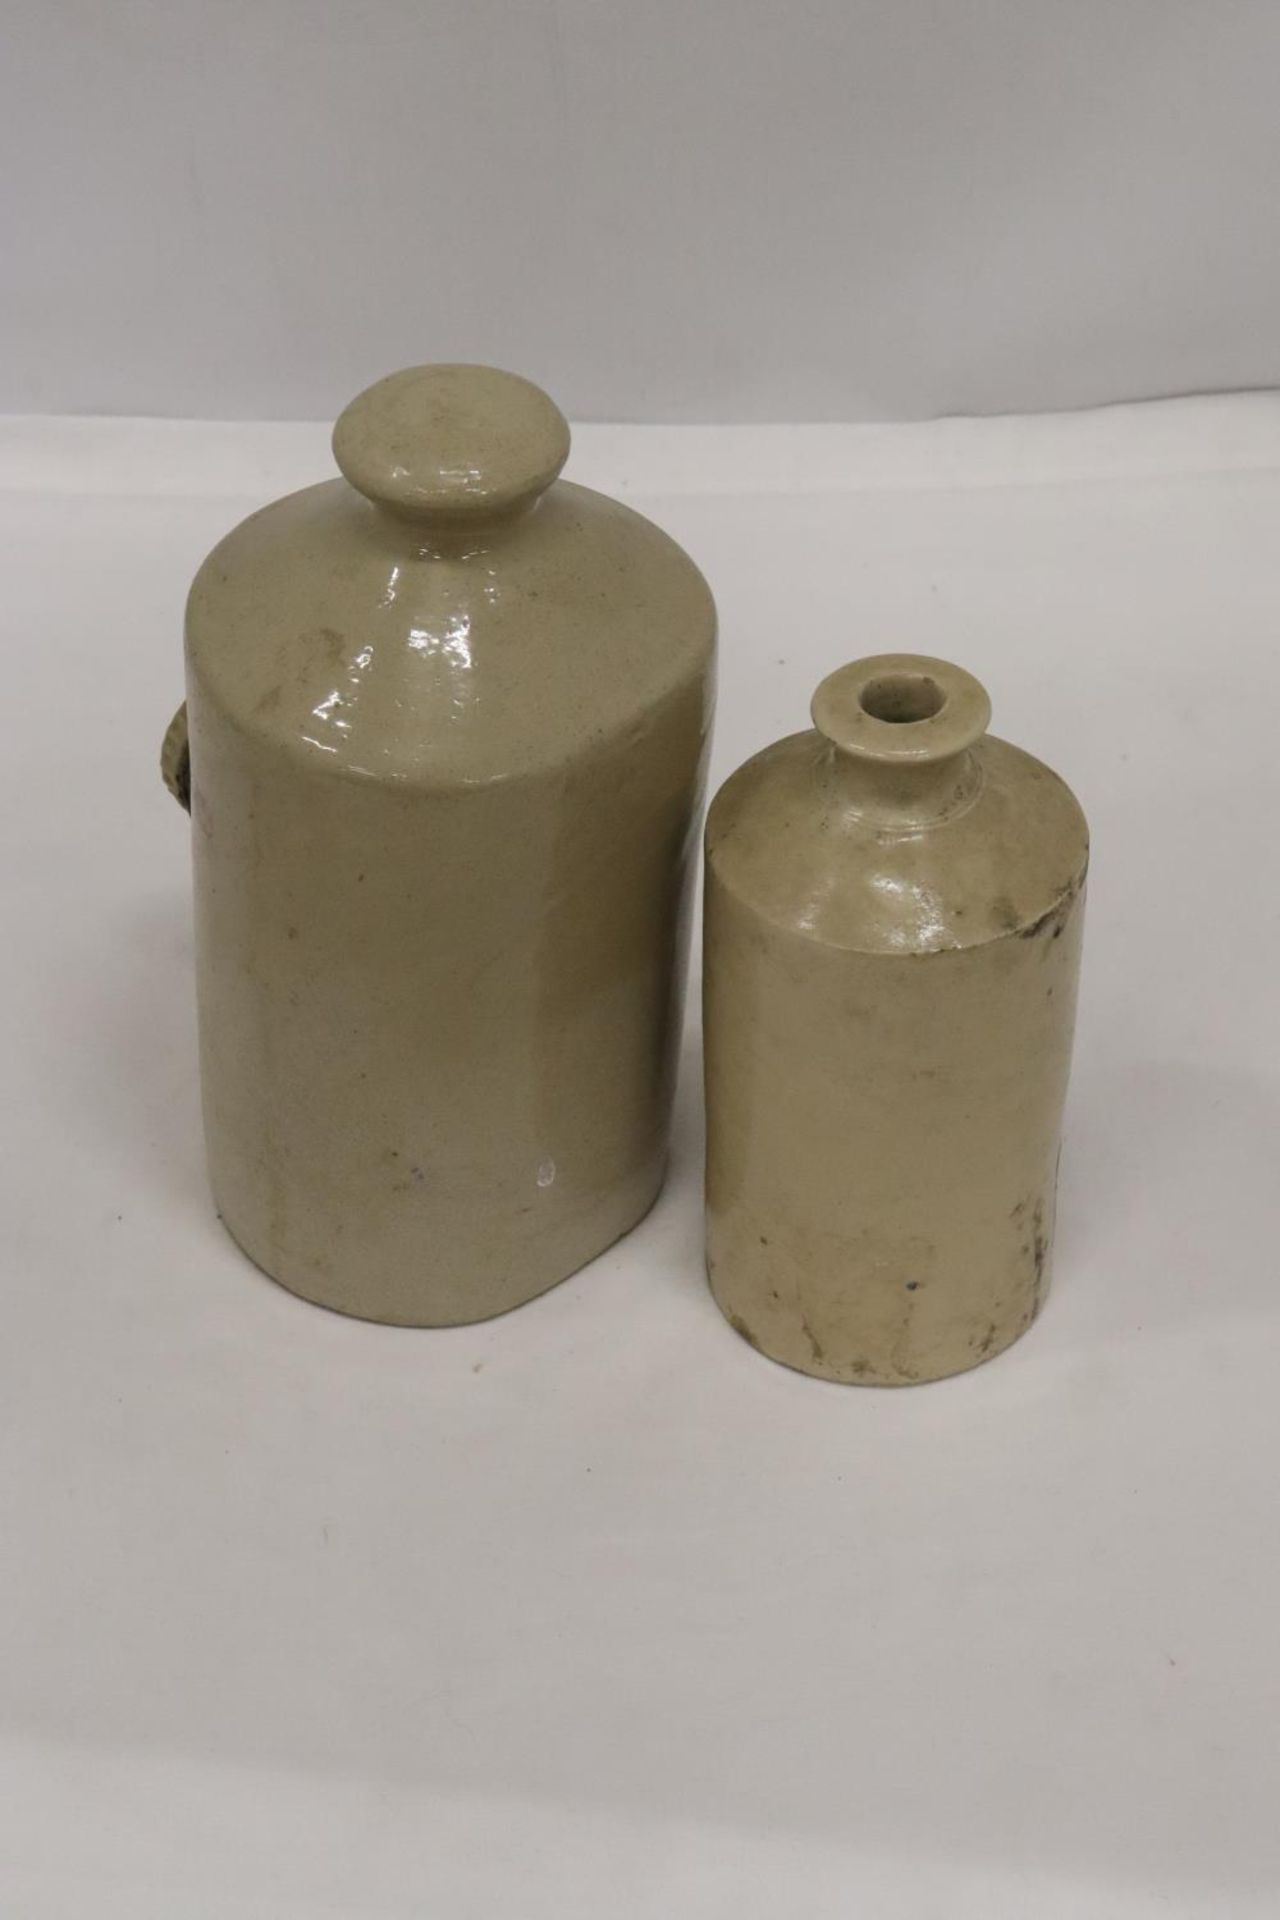 AN ANTIQUE STONEWARE LARGE INK BOTTLE TOGETHER WITH A STONE BED WARMER - Image 6 of 6